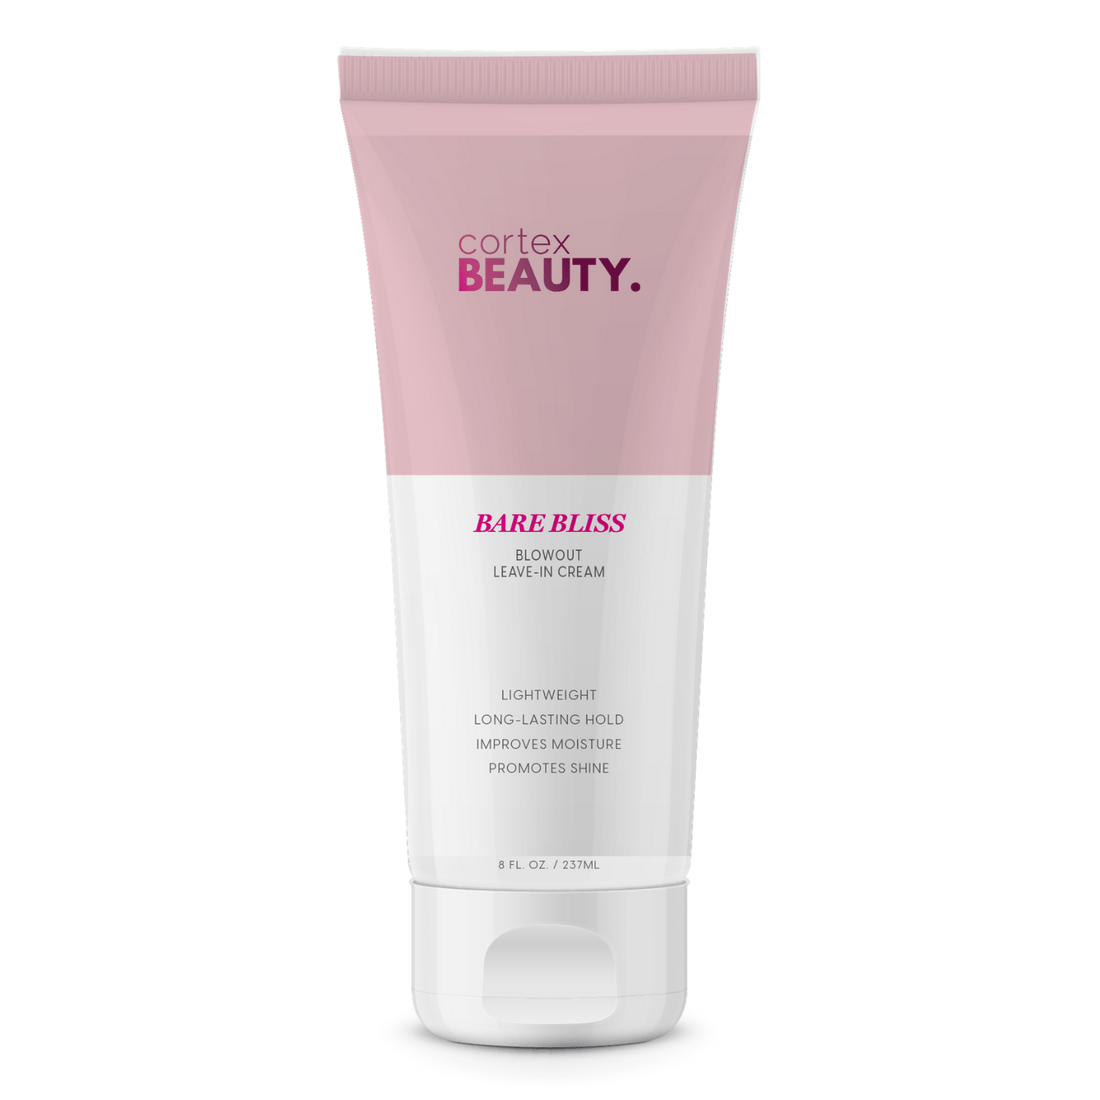 Cortex Beauty Bare Bliss Blowout Leave-In Cream